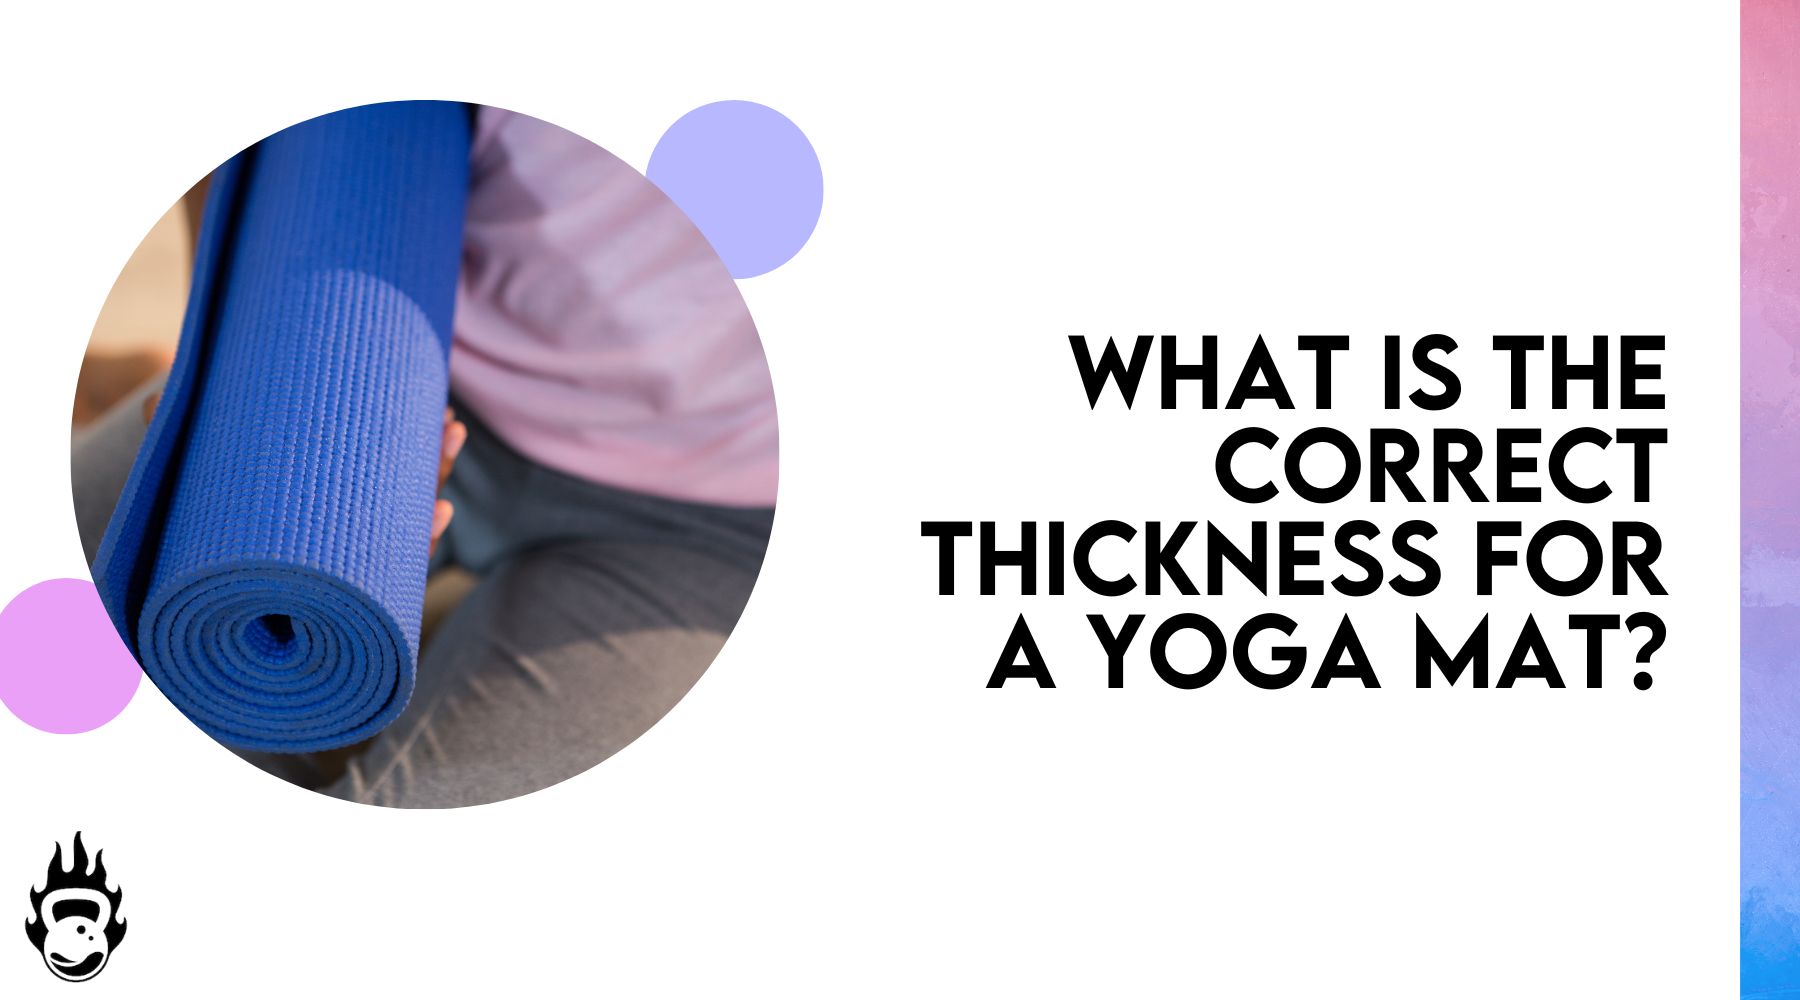 What is the correct thickness for a yoga mat?